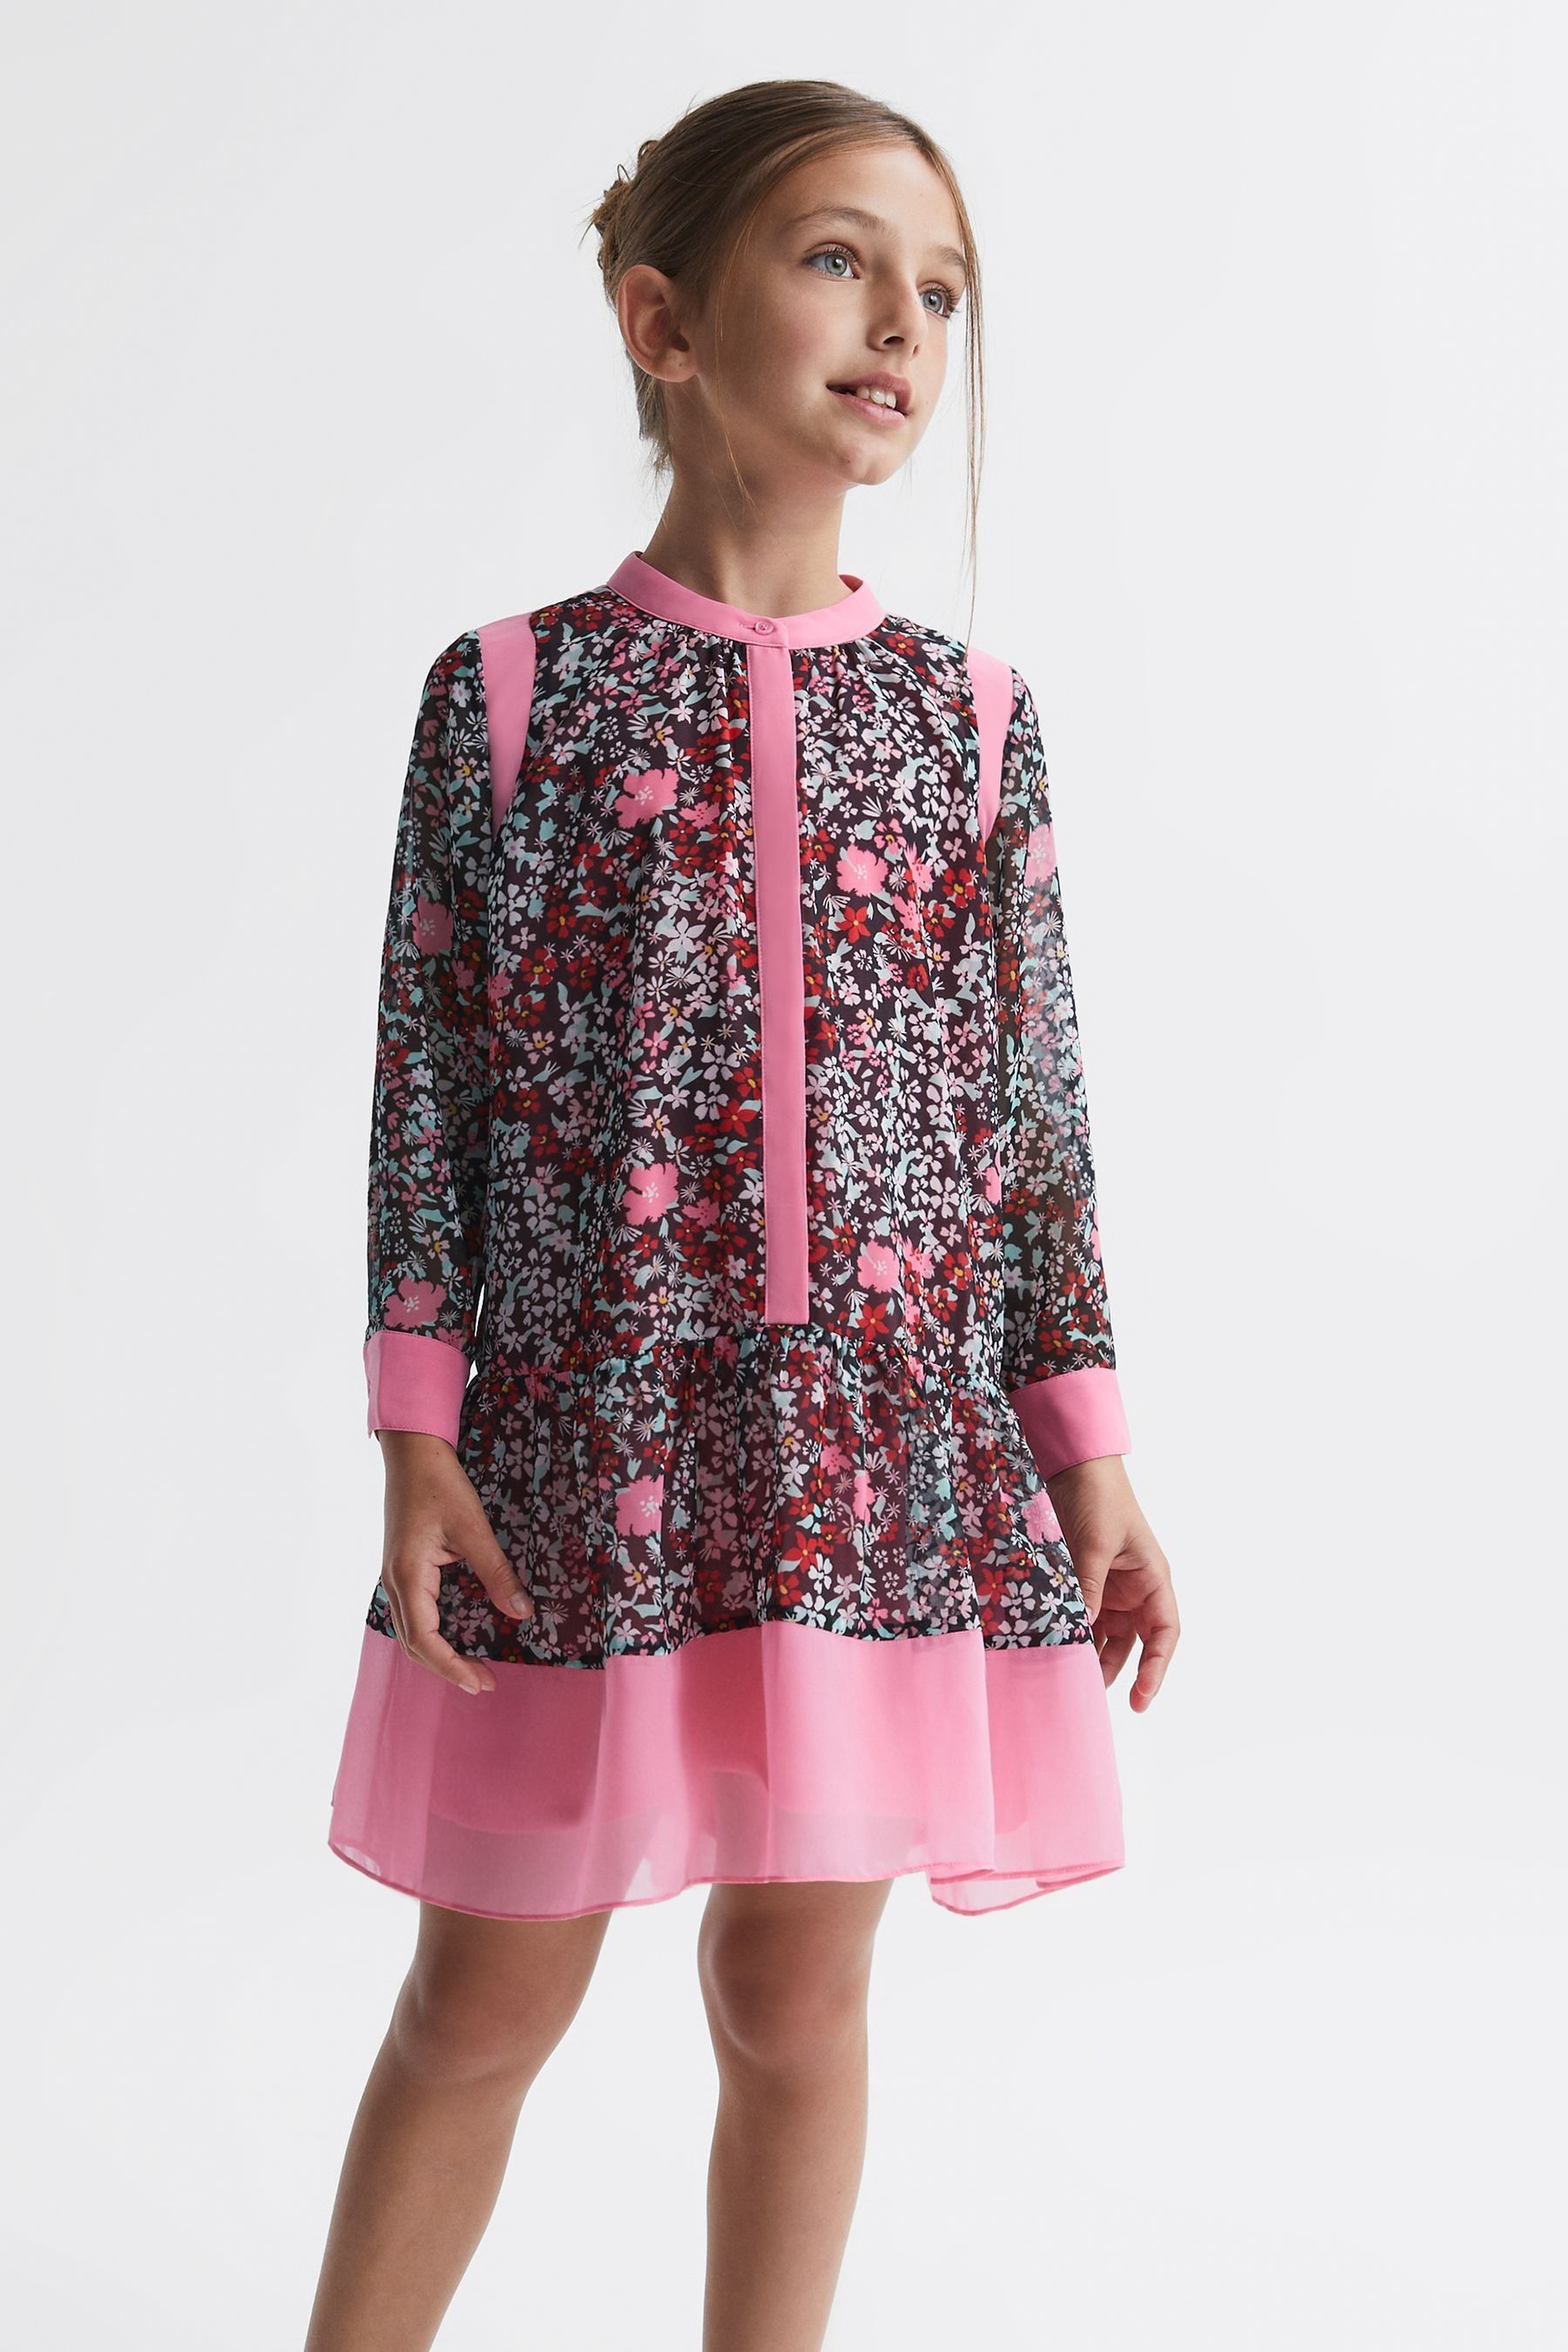 Reiss Kids' Camilla - Pink Junior Floral Print Contrast Dress, Age 8-9 Years